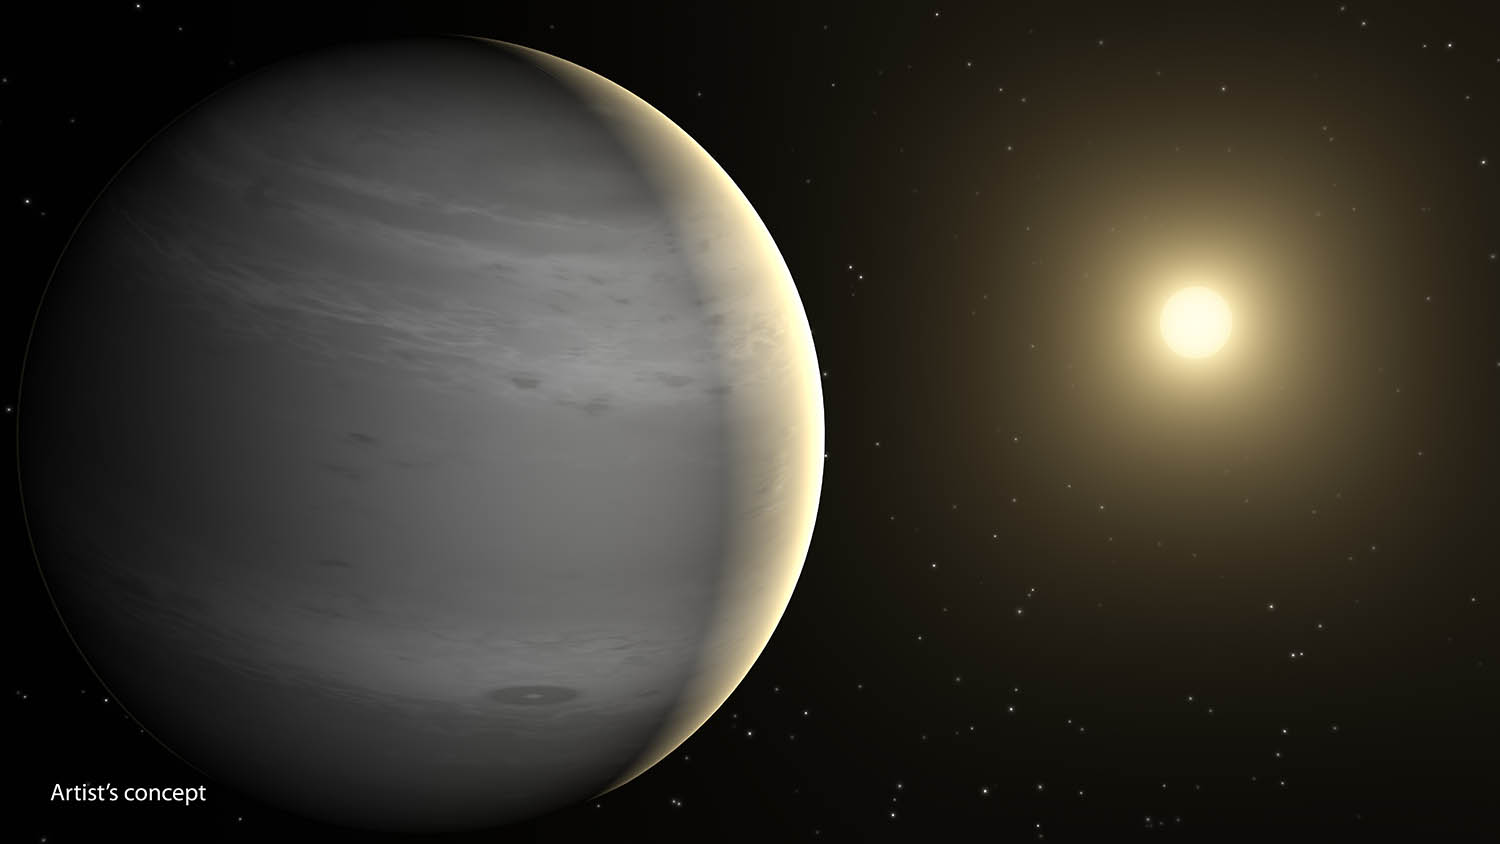 Exoplanet-catalog – Exoplanet Exploration: Planets Beyond our